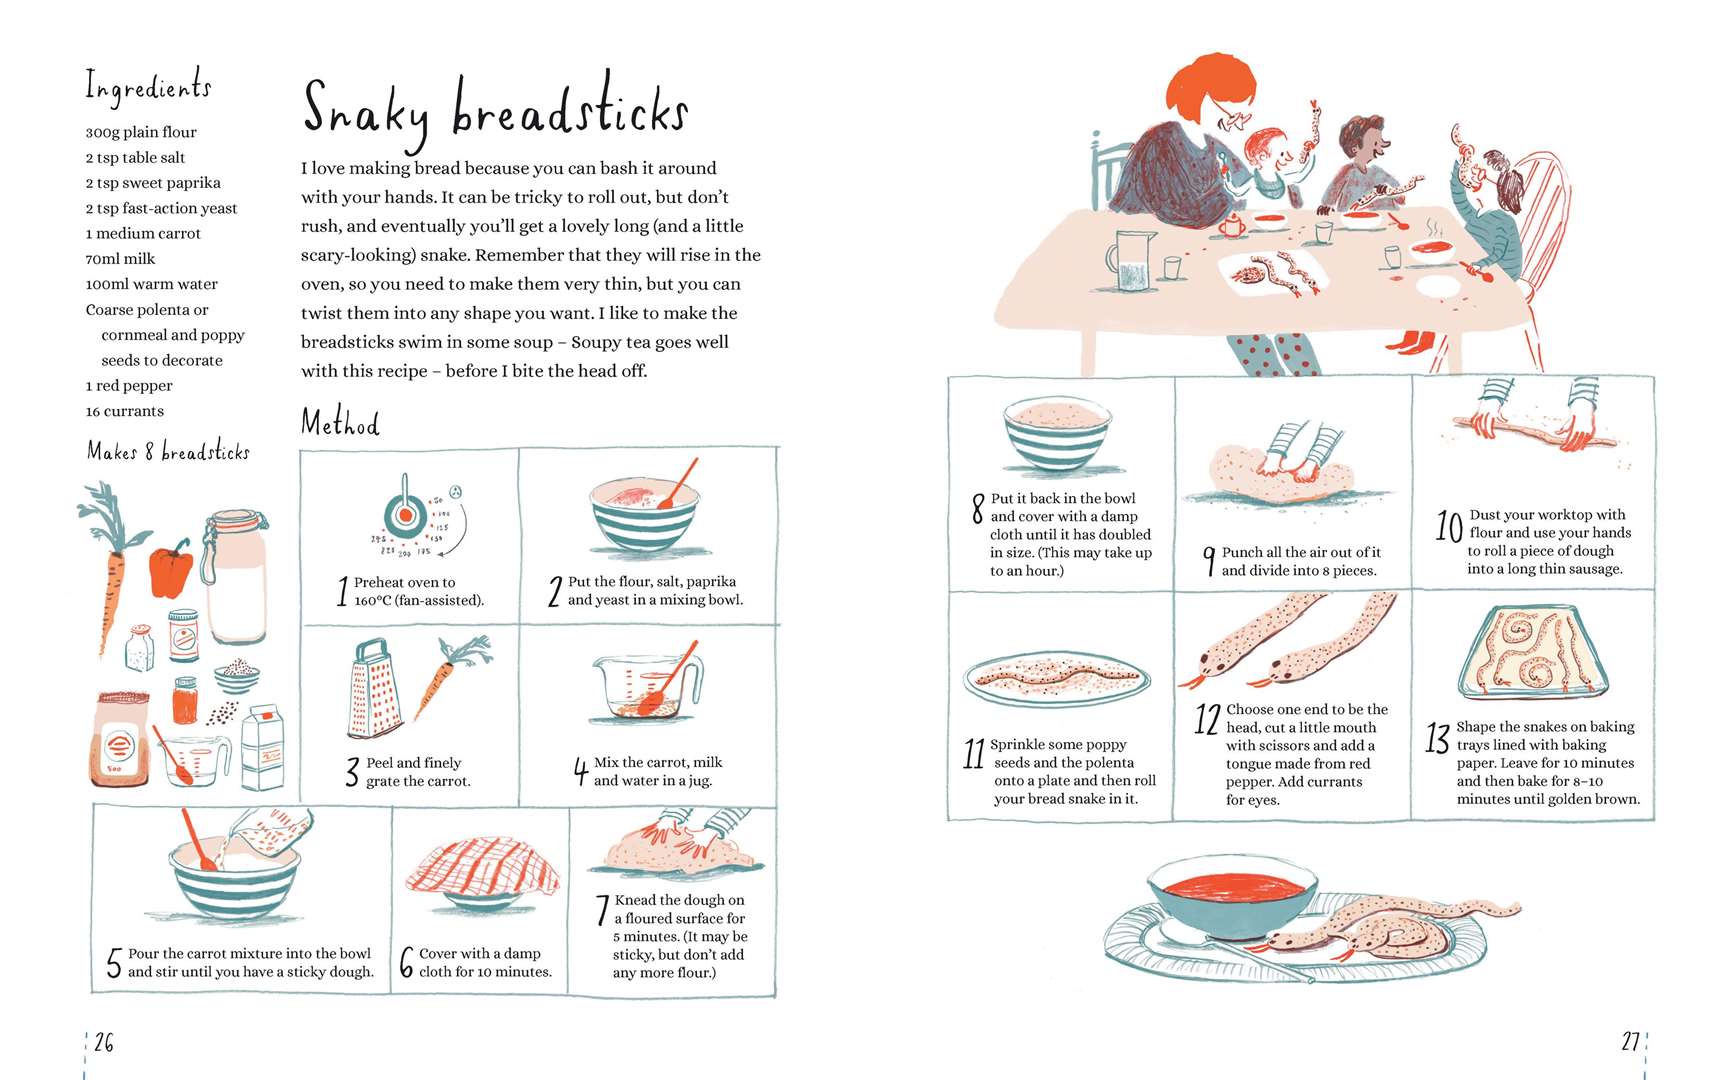 Snakey Breadsticks recipe from My First Cookbook by David Atherton, illustrated by Rachel Stubbs. Picture: Text © 2020 Nomadbaker Ltd/Illustrations © 2020 Rachel Stubbs/Additional Illustrations © 2020 Walker Books Ltd/PA